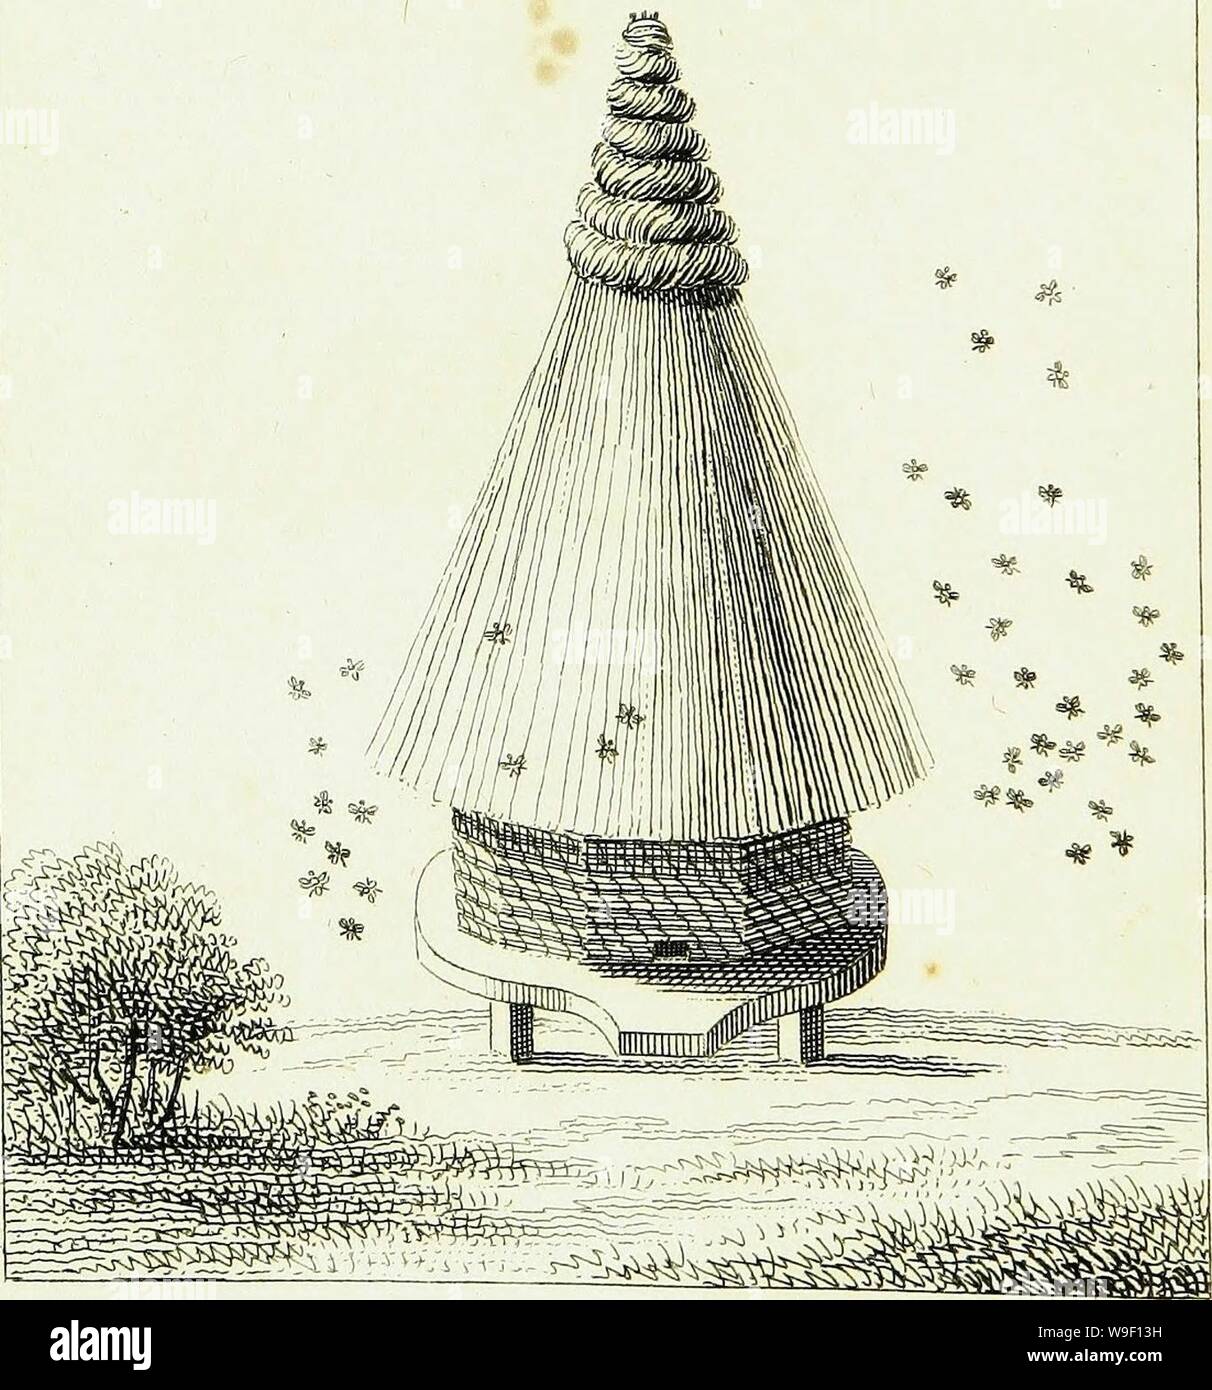 Archive image from page 7 of Traité sur le gouvernement des. Traité sur le gouvernement des abeilles  CUbiodiversity1178837 Year: 1816 ( Stock Photo